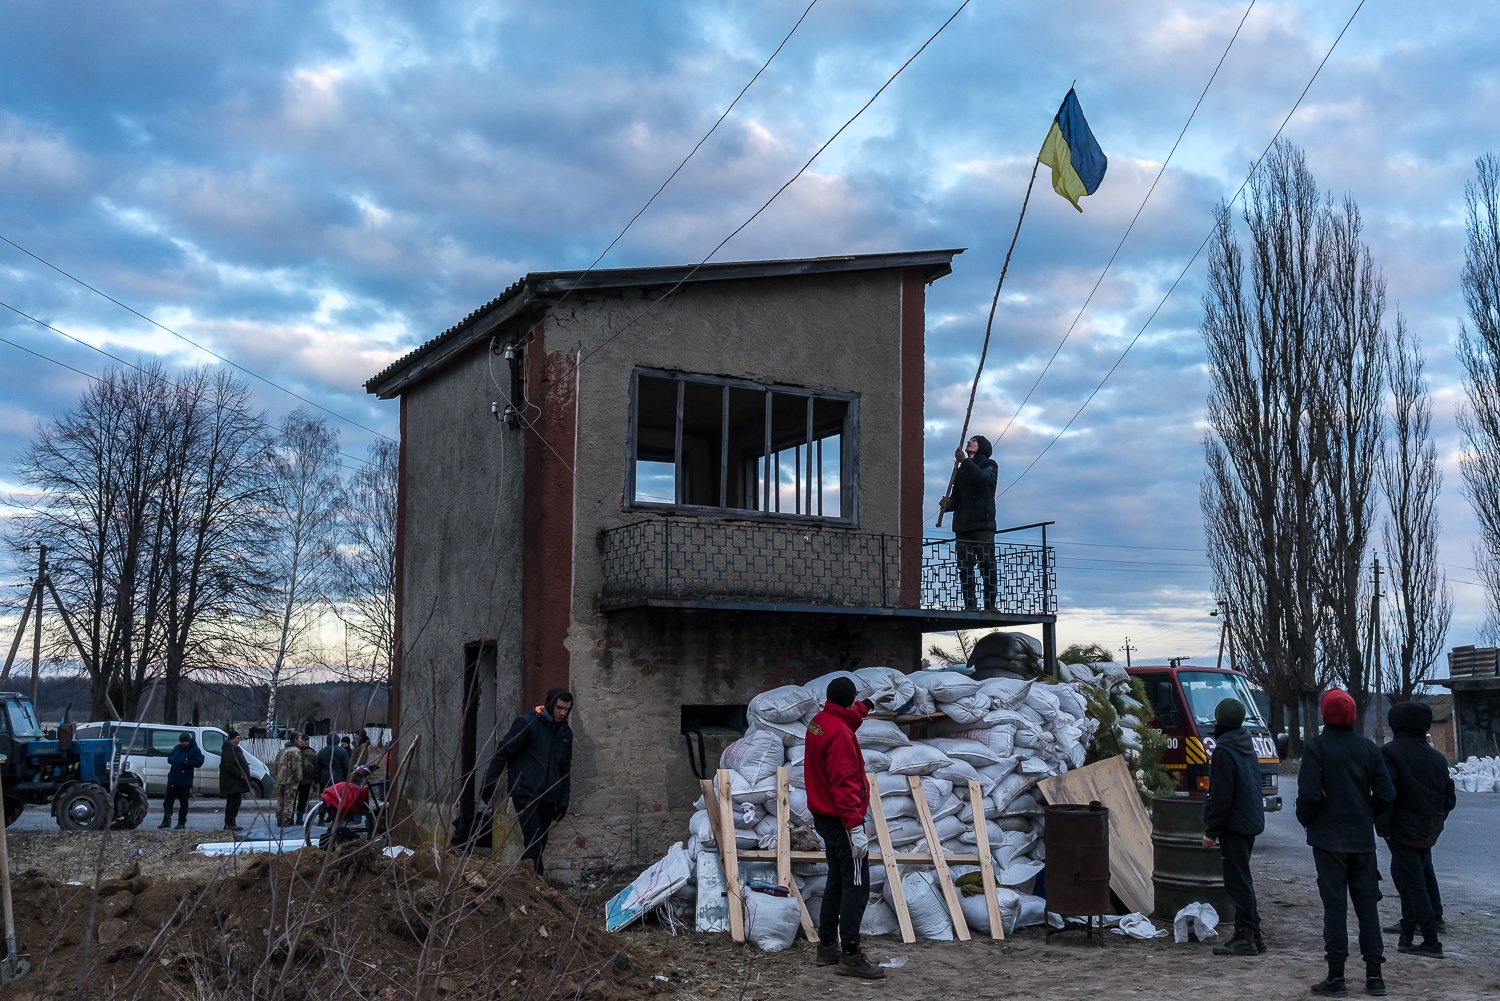  The Ukrainian flag is raised over a newly established checkpoint at the edge of a village on Sunday, February 27, 2022 in Hushchyntsi, Ukraine. 